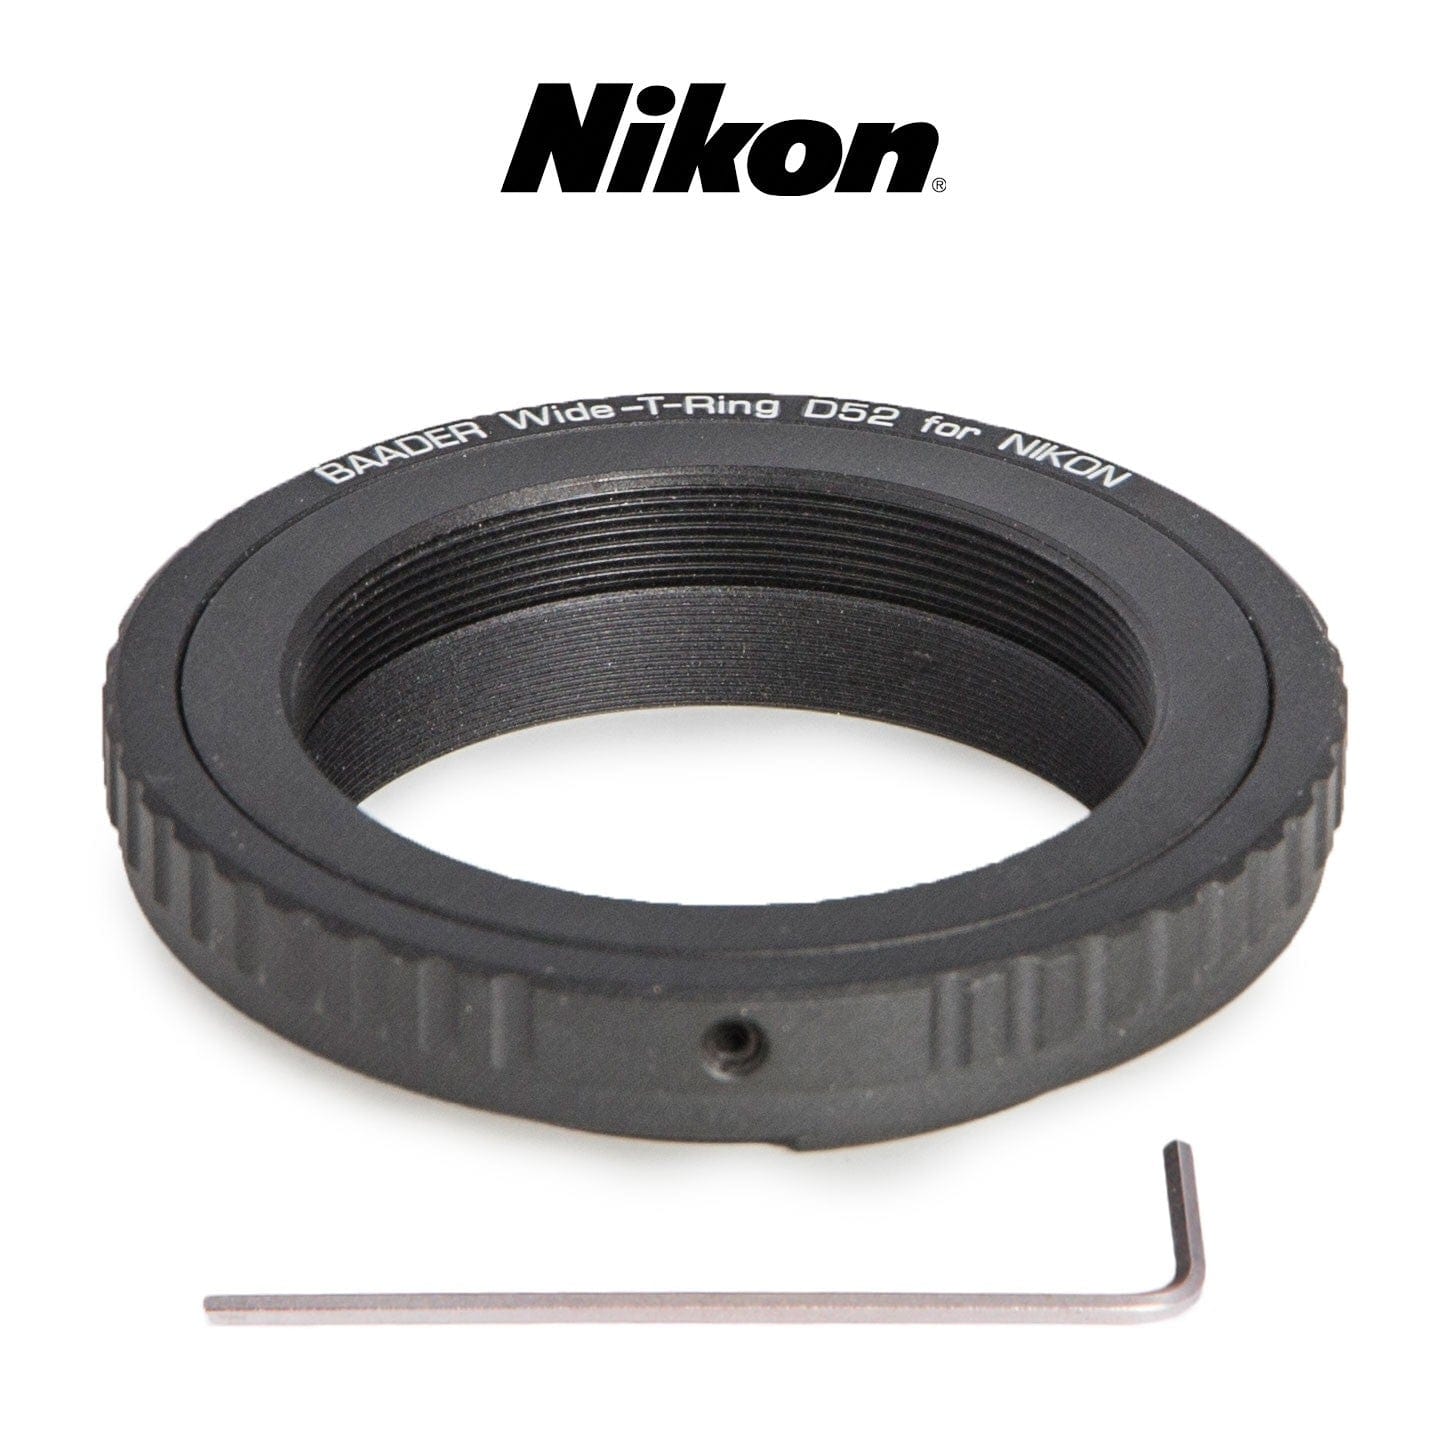 Baader Planetarium Accessory Baader Wide T-Ring Nikon with D52i to T-2 and S52 - 2408333